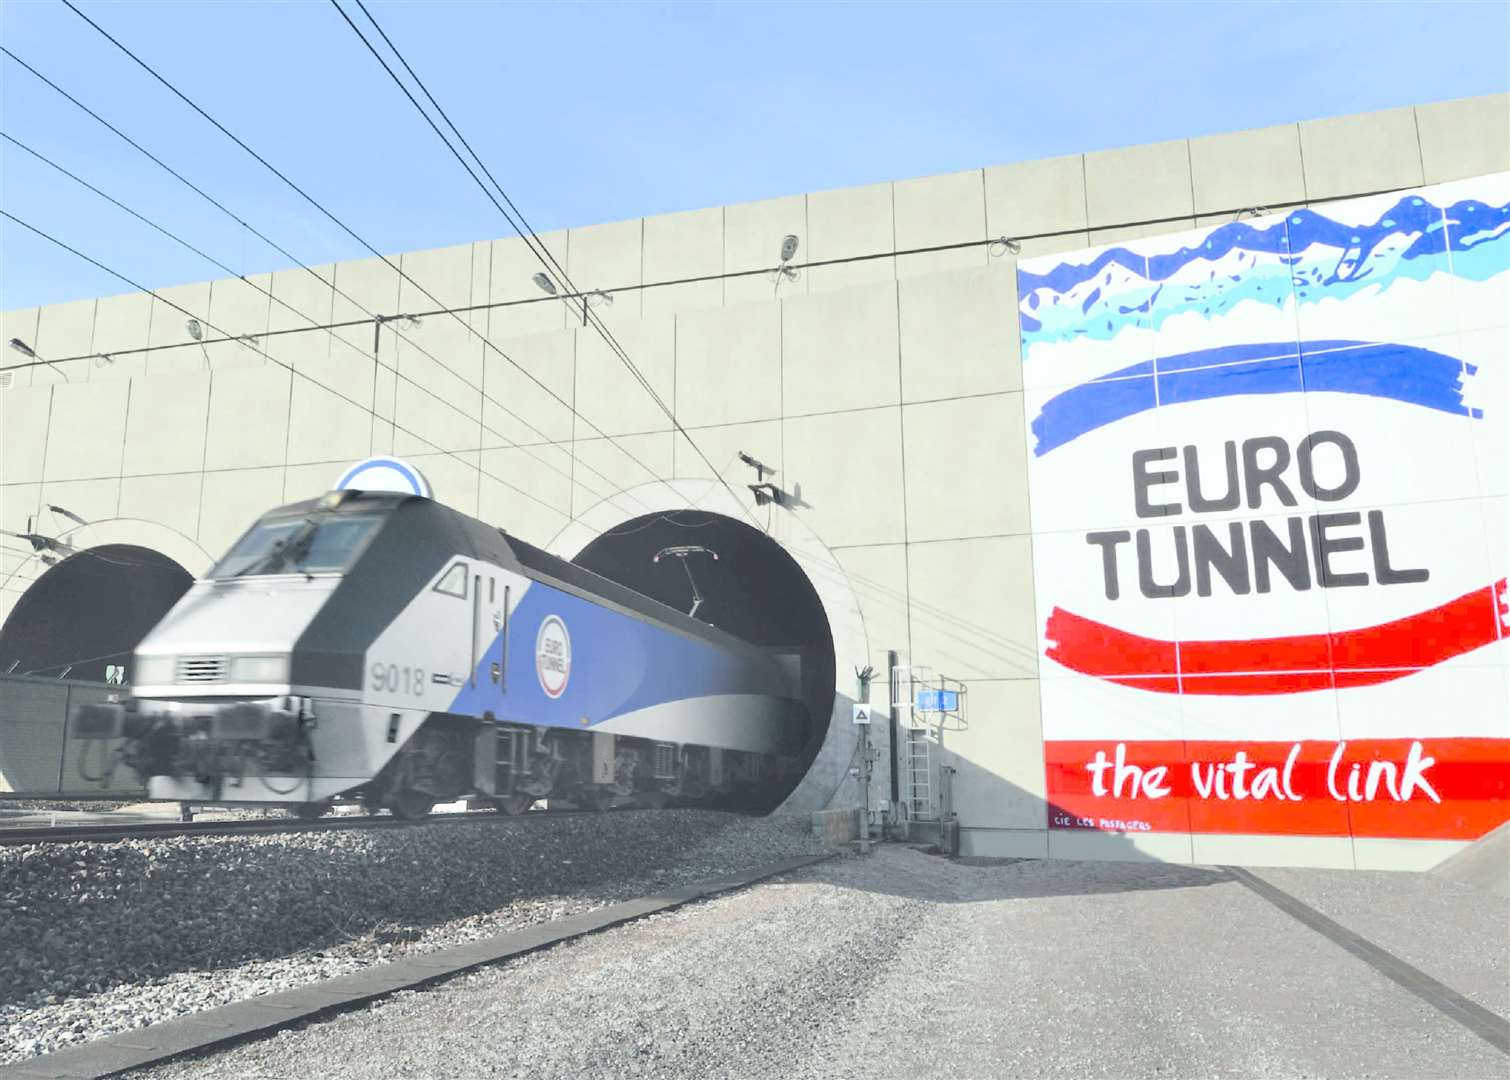 Eurotunnel hopes the 24/7 system will prevent delays